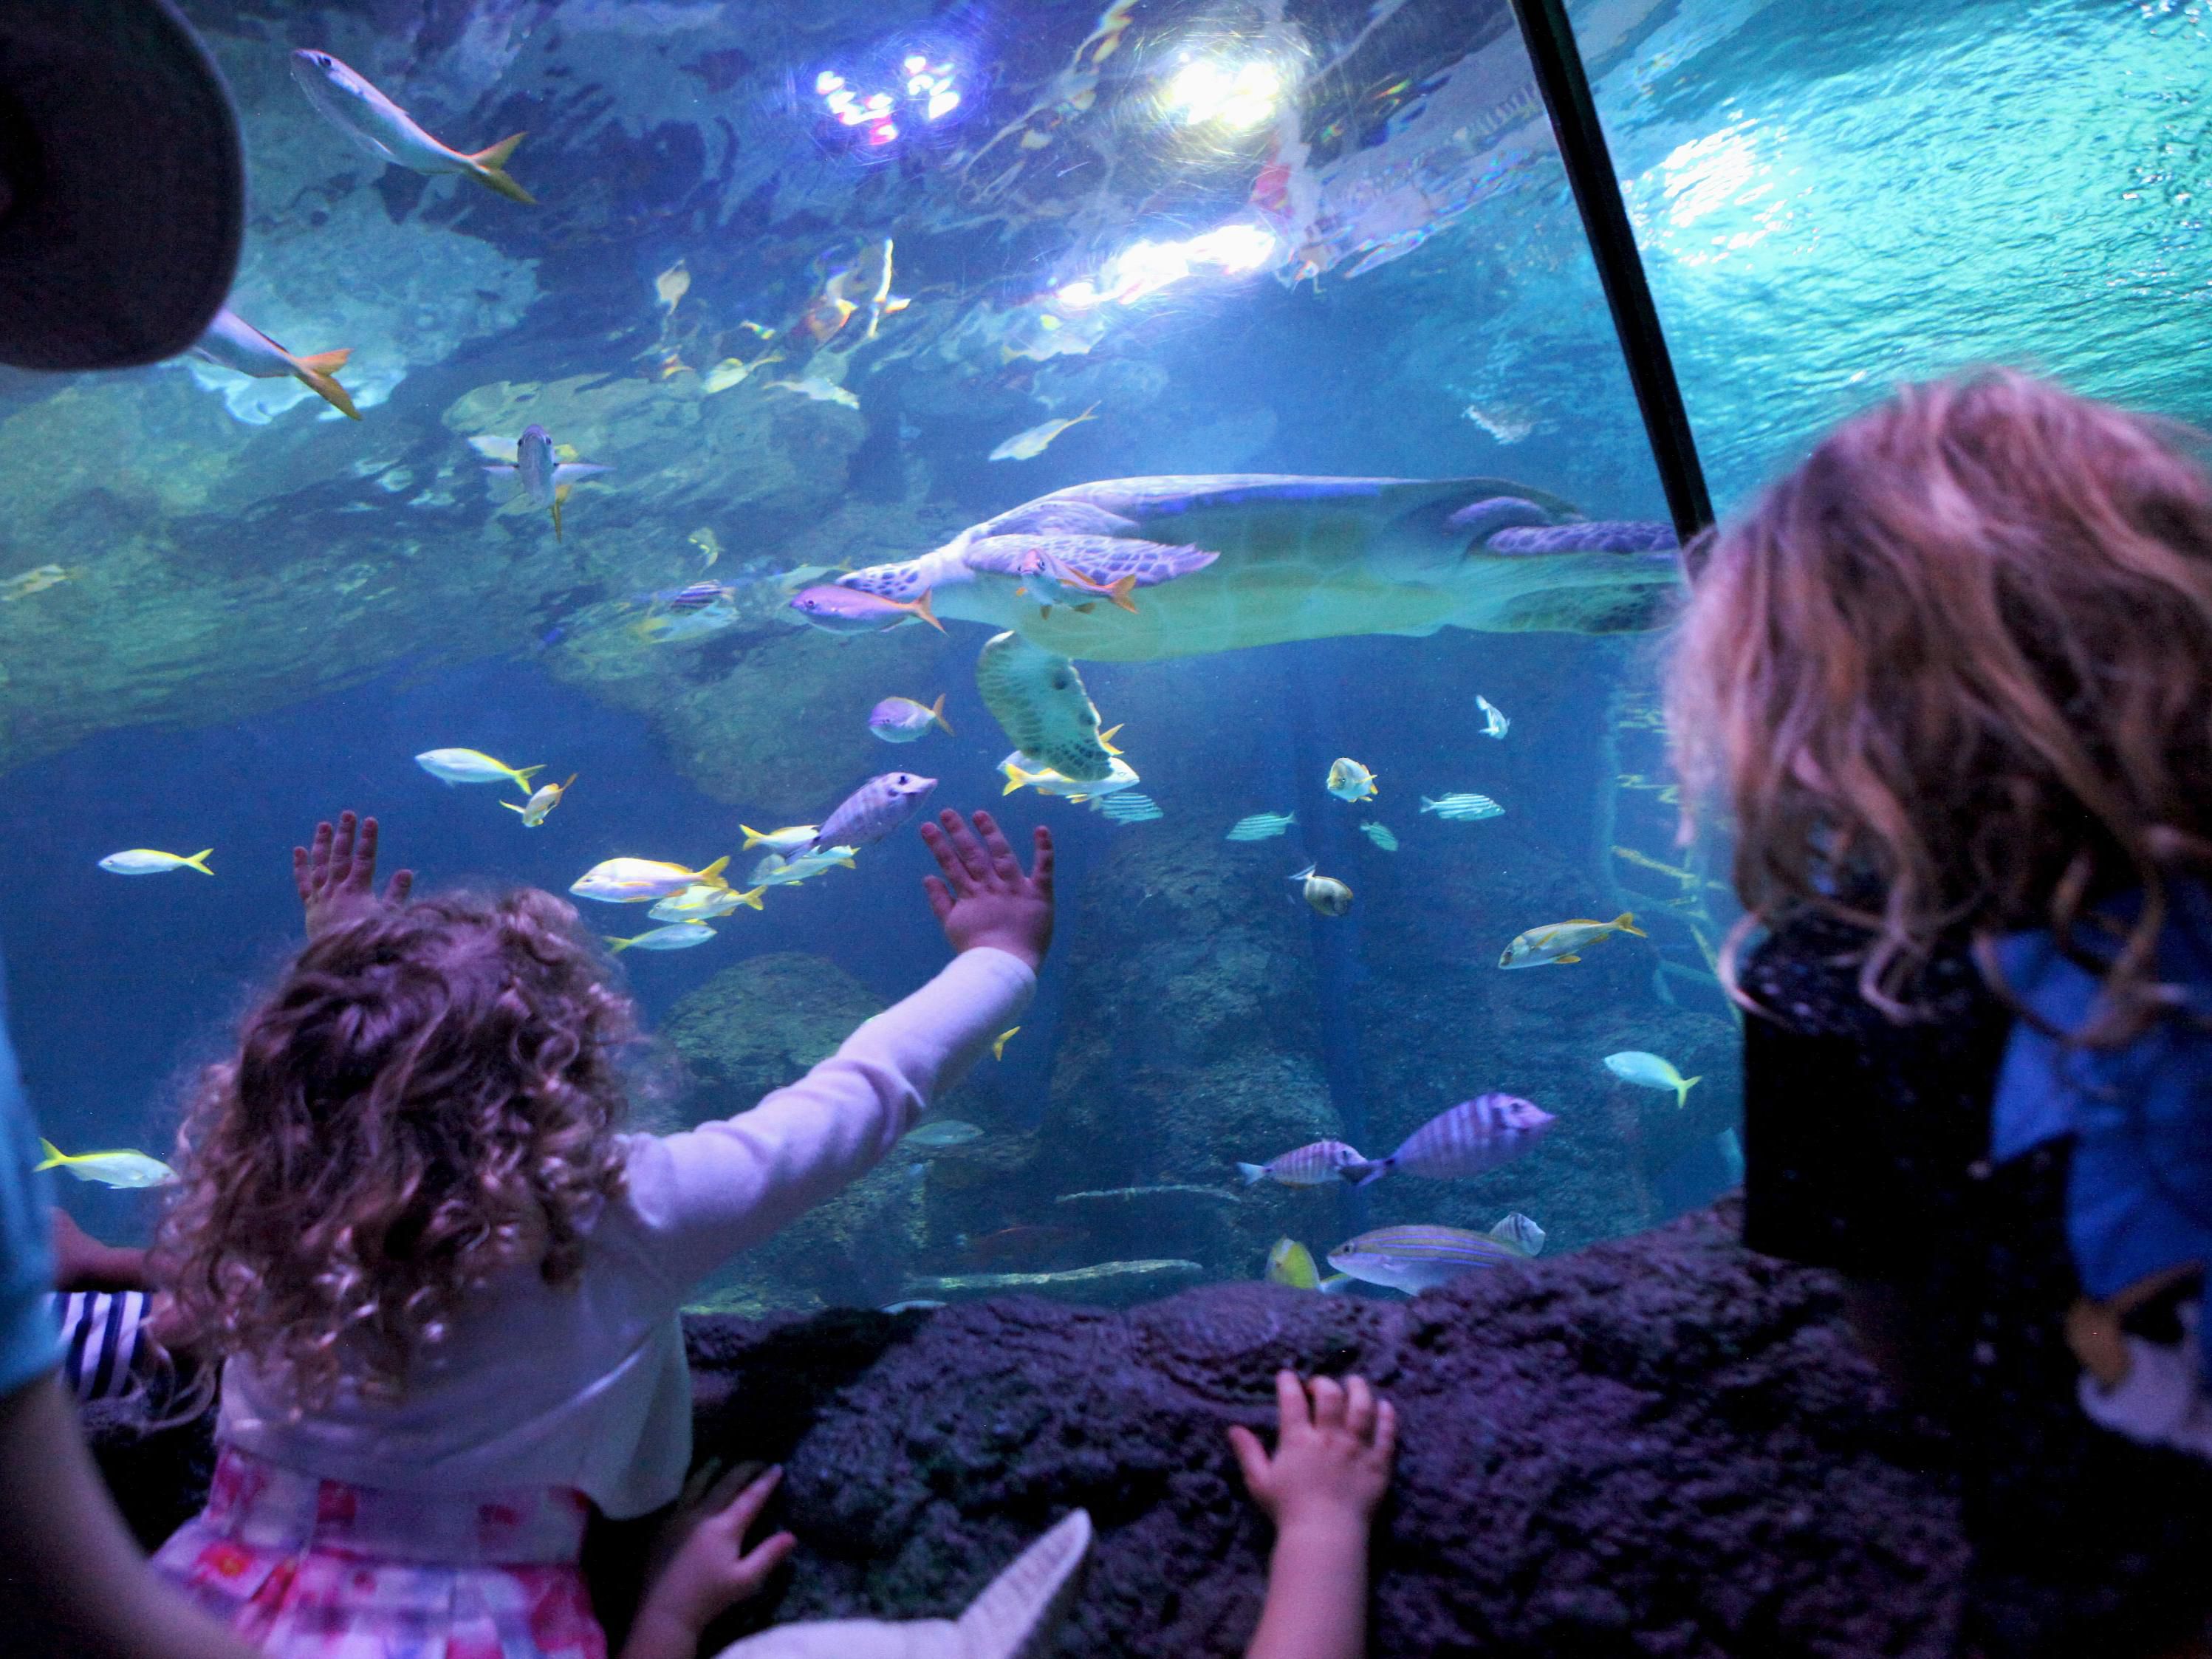 Sea Life Manchester is a quick 20-minute drive from our hotel